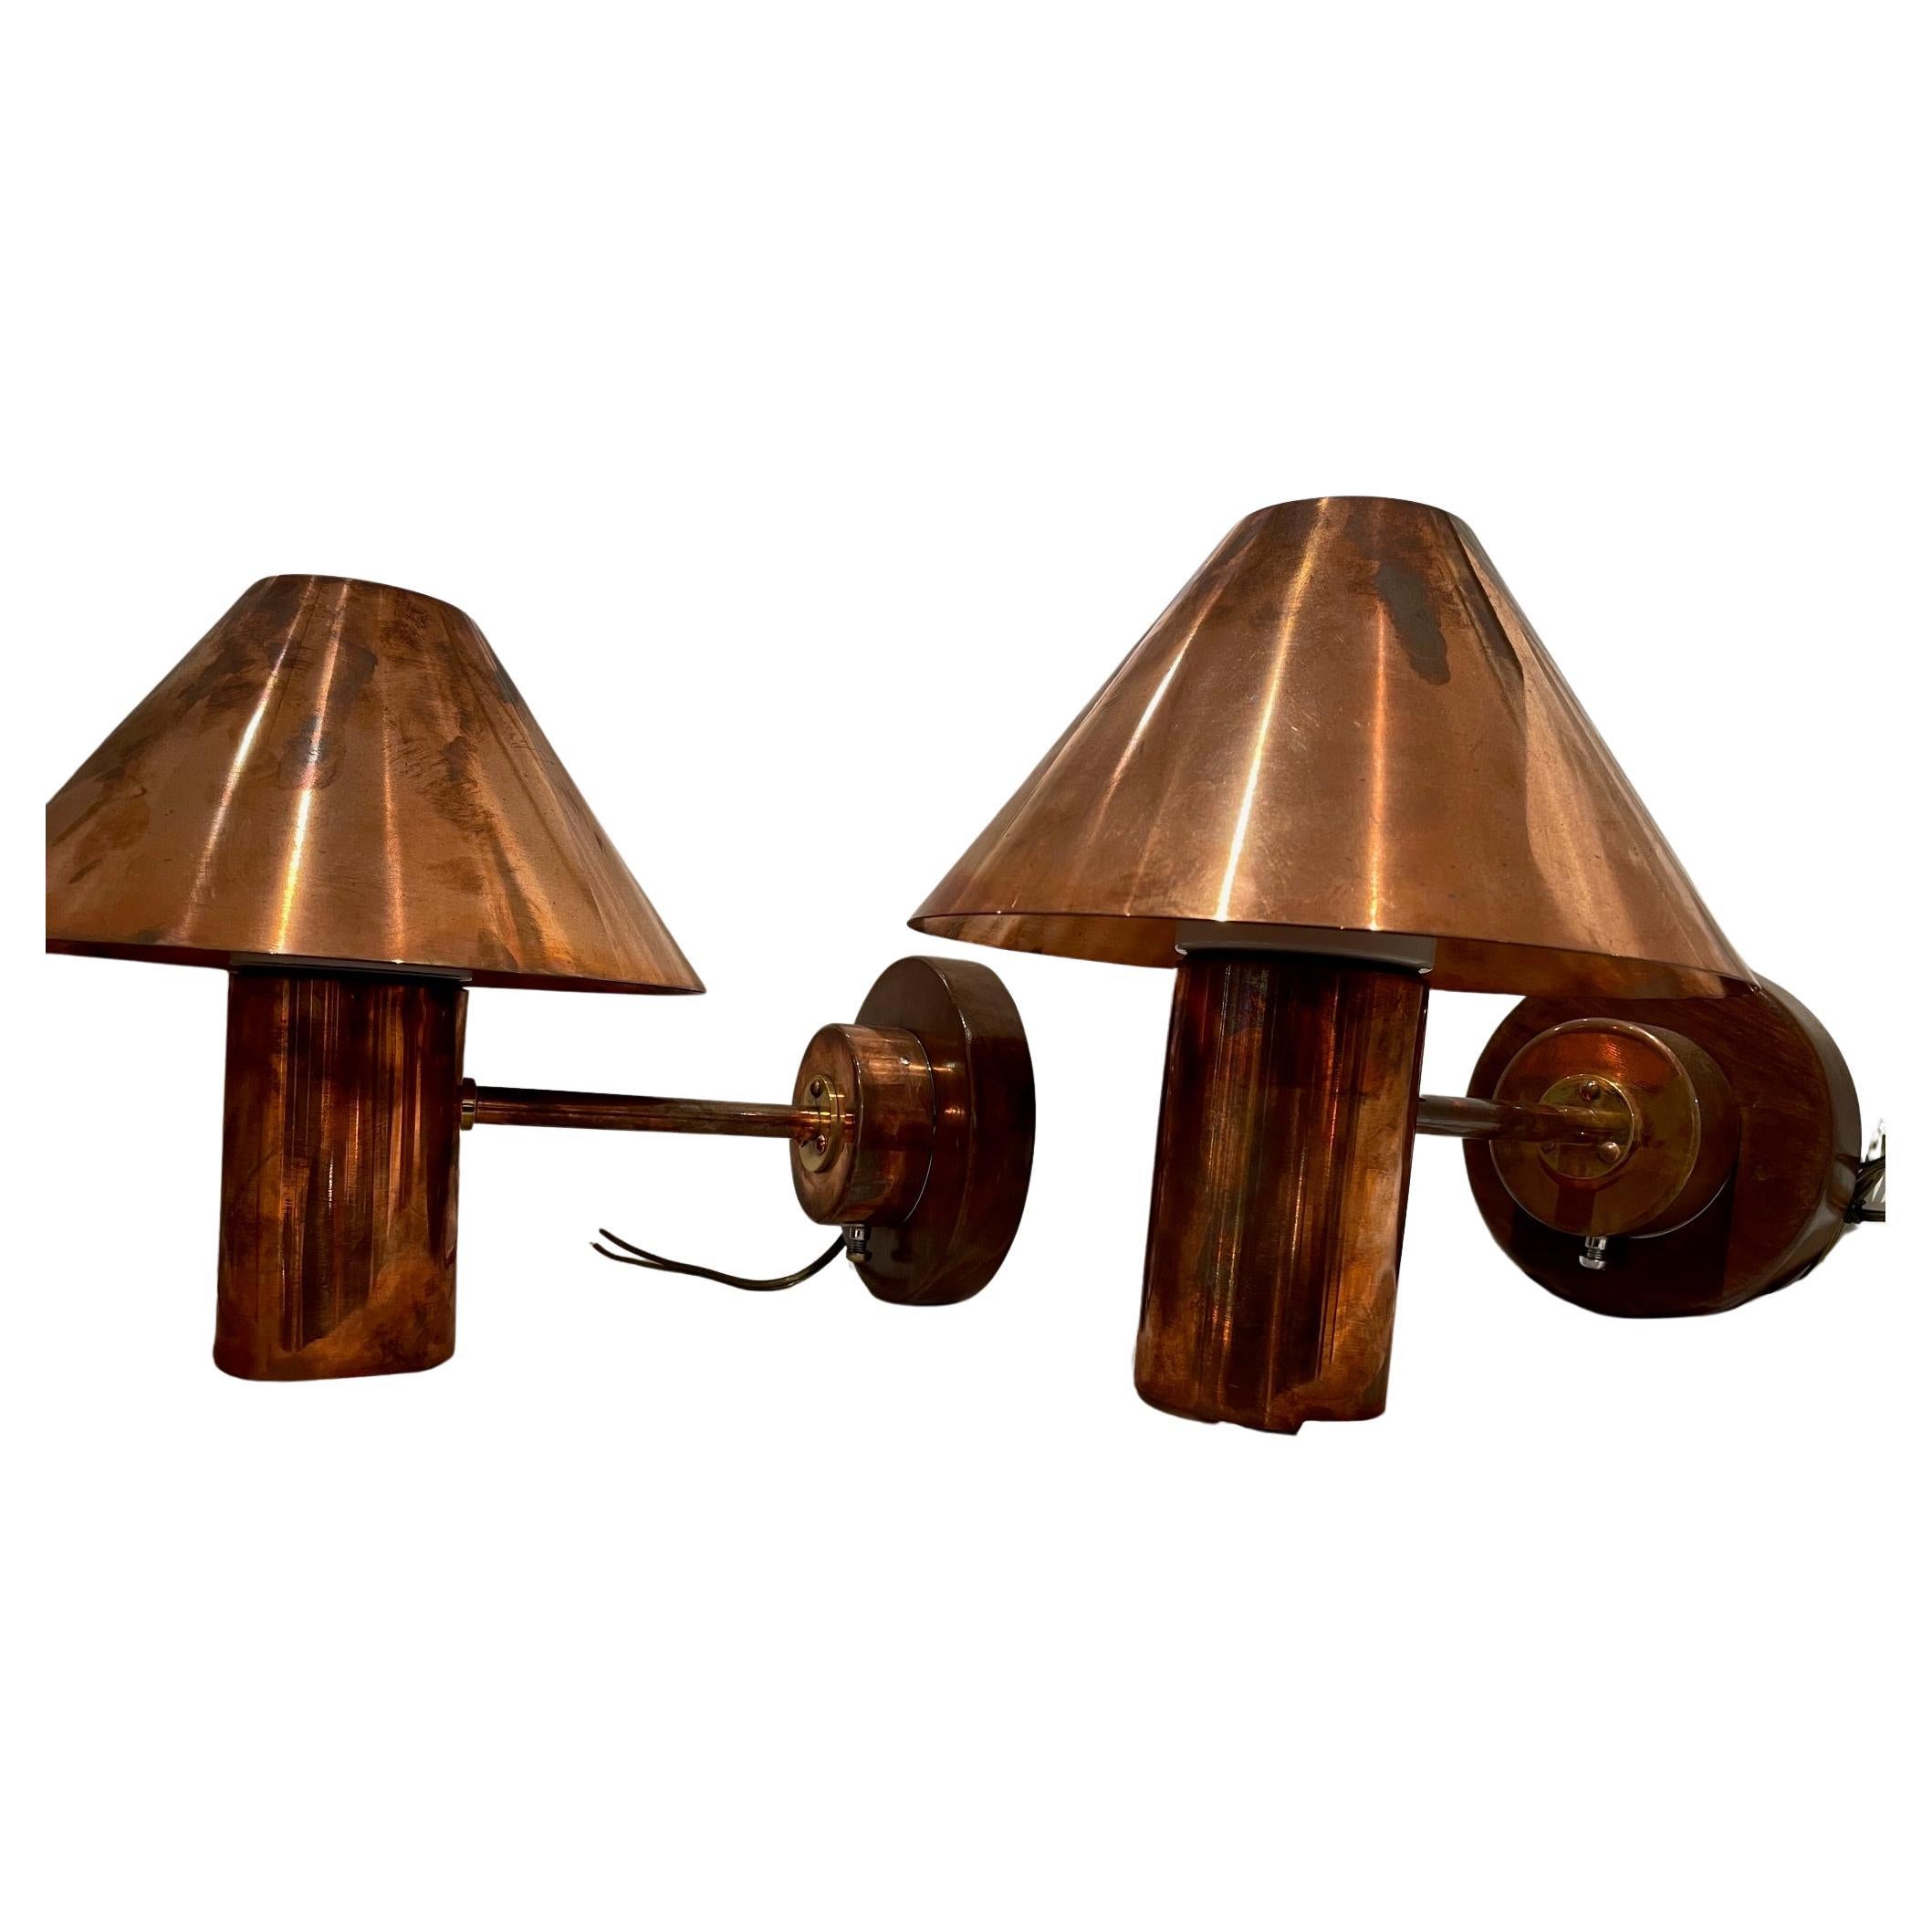 A pair of copper bunk lights from the quarters of a decommissioned ship.  Mounted on teak back plates and complete with copper shades.  Porcelain light bulb socket..  Originally European; rewired for American use.  Circa 1970's.

The Lockhart